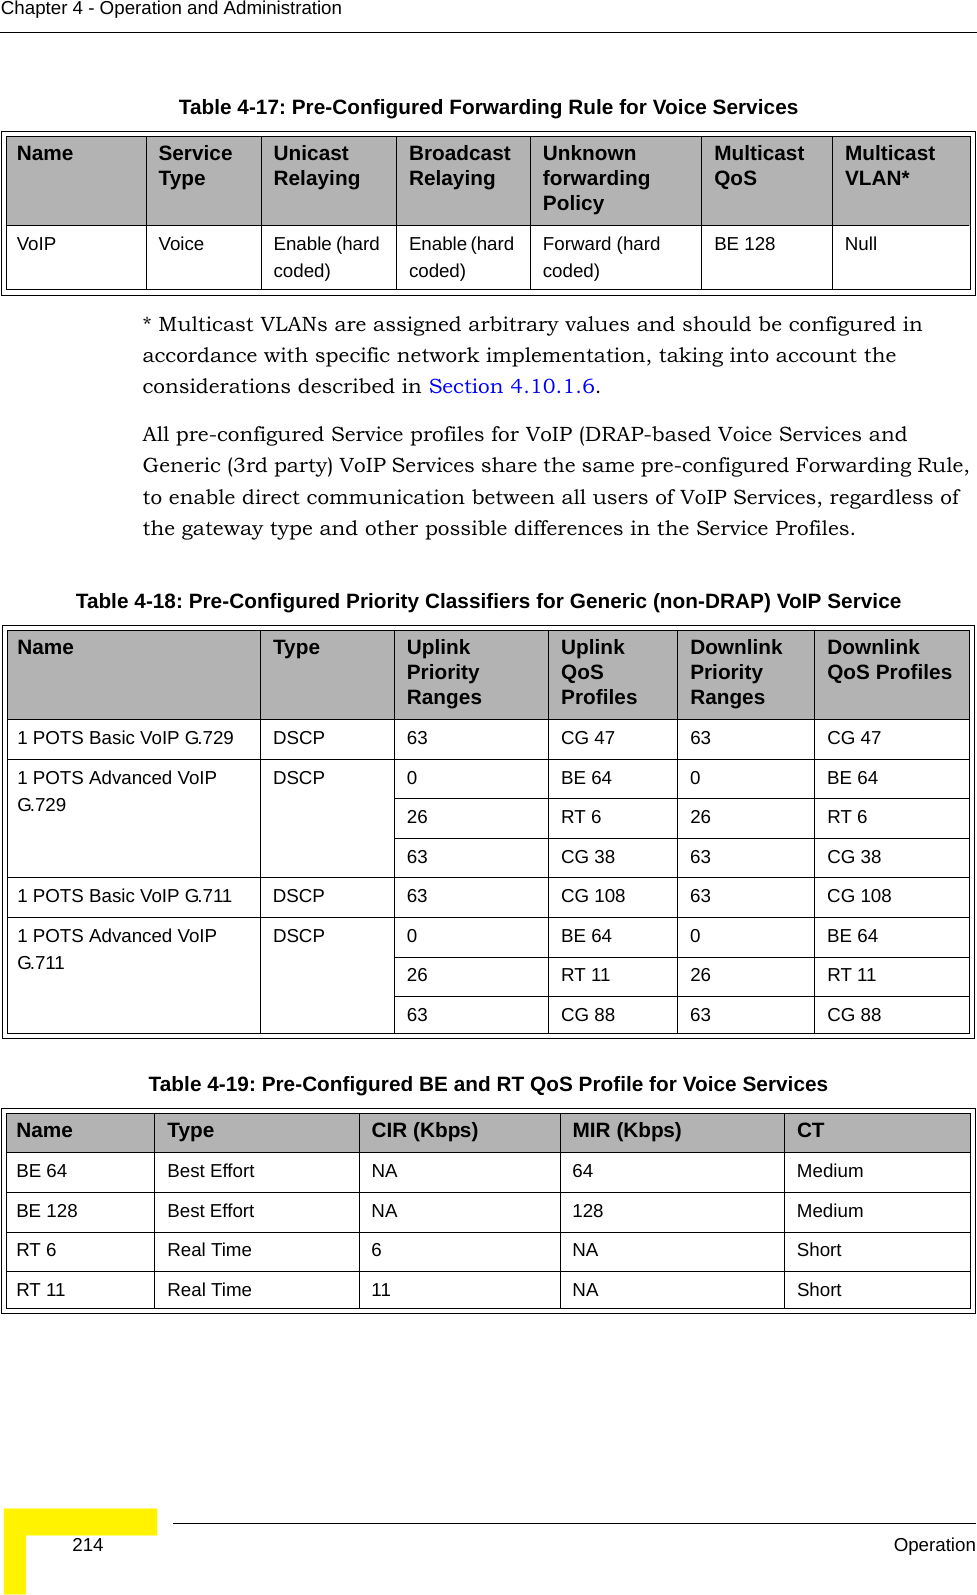  214 OperationChapter 4 - Operation and Administration* Multicast VLANs are assigned arbitrary values and should be configured in accordance with specific network implementation, taking into account the considerations described in Section 4.10.1.6.All pre-configured Service profiles for VoIP (DRAP-based Voice Services and Generic (3rd party) VoIP Services share the same pre-configured Forwarding Rule, to enable direct communication between all users of VoIP Services, regardless of the gateway type and other possible differences in the Service Profiles. Table 4-17: Pre-Configured Forwarding Rule for Voice ServicesName Service Type Unicast Relaying Broadcast Relaying Unknown forwarding PolicyMulticast QoS Multicast VLAN*VoIP Voice Enable (hard coded)Enable (hard coded)Forward (hard coded)BE 128 NullTable 4-18: Pre-Configured Priority Classifiers for Generic (non-DRAP) VoIP ServiceName Type Uplink Priority RangesUplink QoS ProfilesDownlink Priority RangesDownlink QoS Profiles1 POTS Basic VoIP G.729 DSCP 63 CG 47 63 CG 471 POTS Advanced VoIP G.729DSCP 0 BE 64 0 BE 6426 RT 6 26  RT 663 CG 38 63  CG 381 POTS Basic VoIP G.711 DSCP 63 CG 108 63  CG 1081 POTS Advanced VoIP G.711DSCP 0 BE 64 0 BE 6426 RT 11 26  RT 1163 CG 88 63  CG 88Table 4-19: Pre-Configured BE and RT QoS Profile for Voice ServicesName Type CIR (Kbps) MIR (Kbps) CTBE 64 Best Effort NA 64 MediumBE 128 Best Effort NA 128 MediumRT 6 Real Time 6 NA ShortRT 11 Real Time 11 NA Short